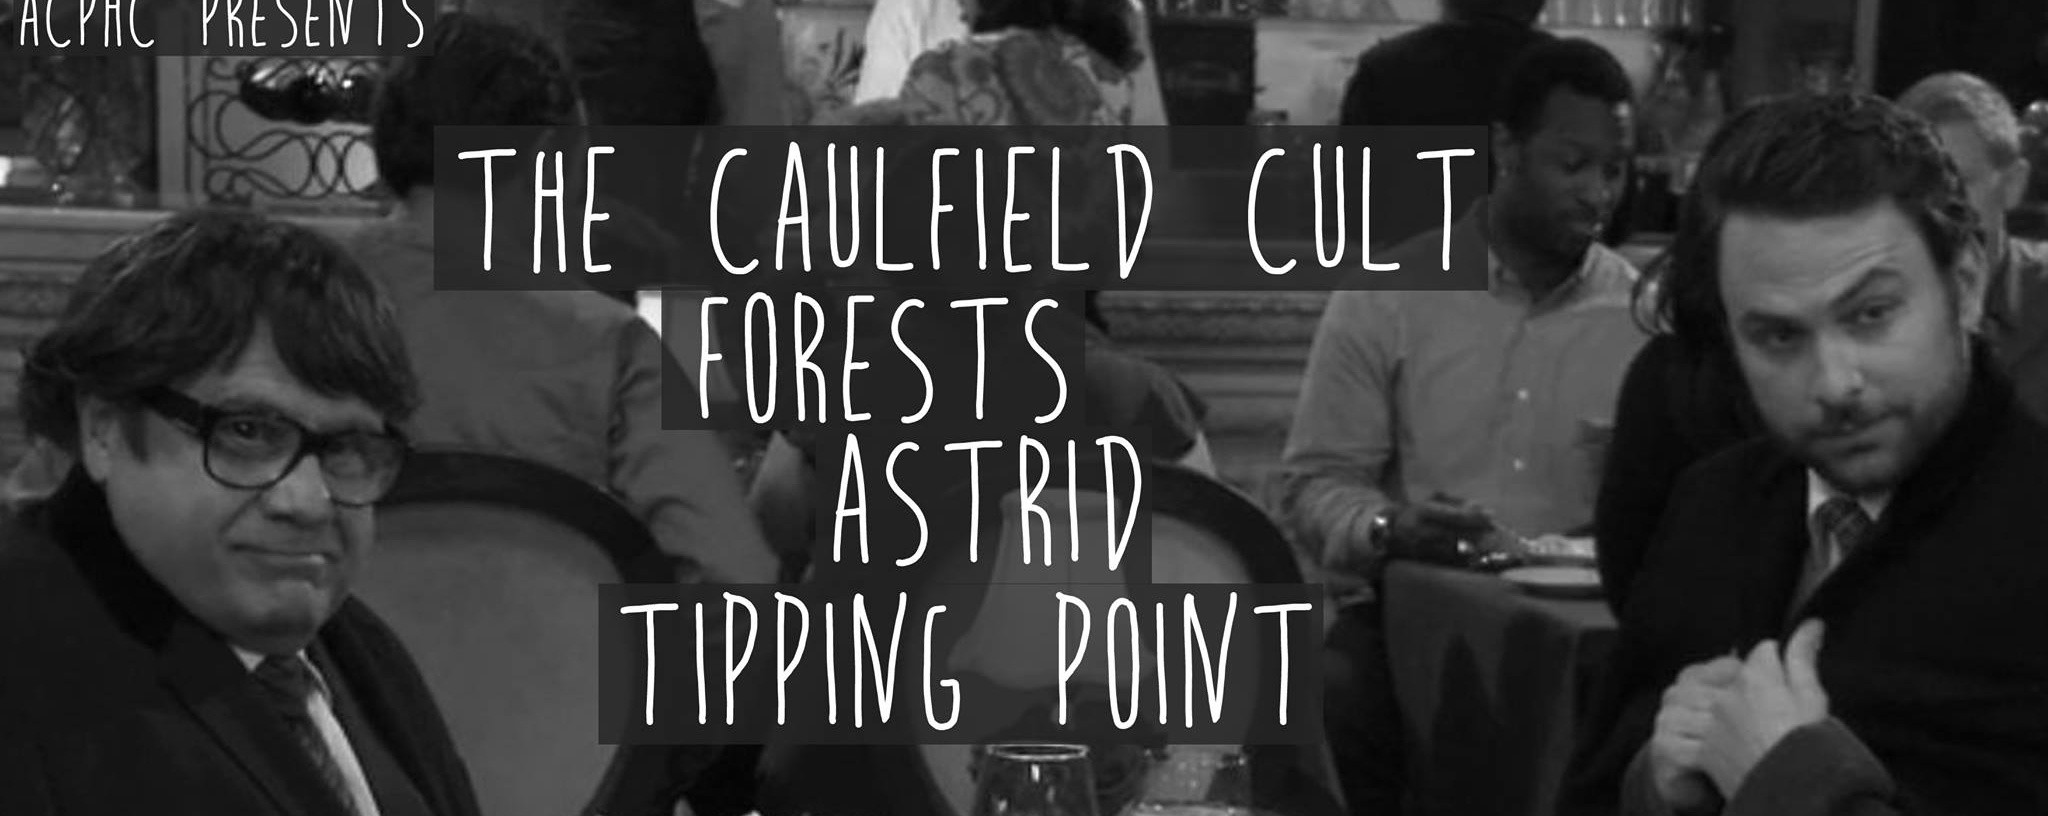 astrid/tcc/forests/tipping point